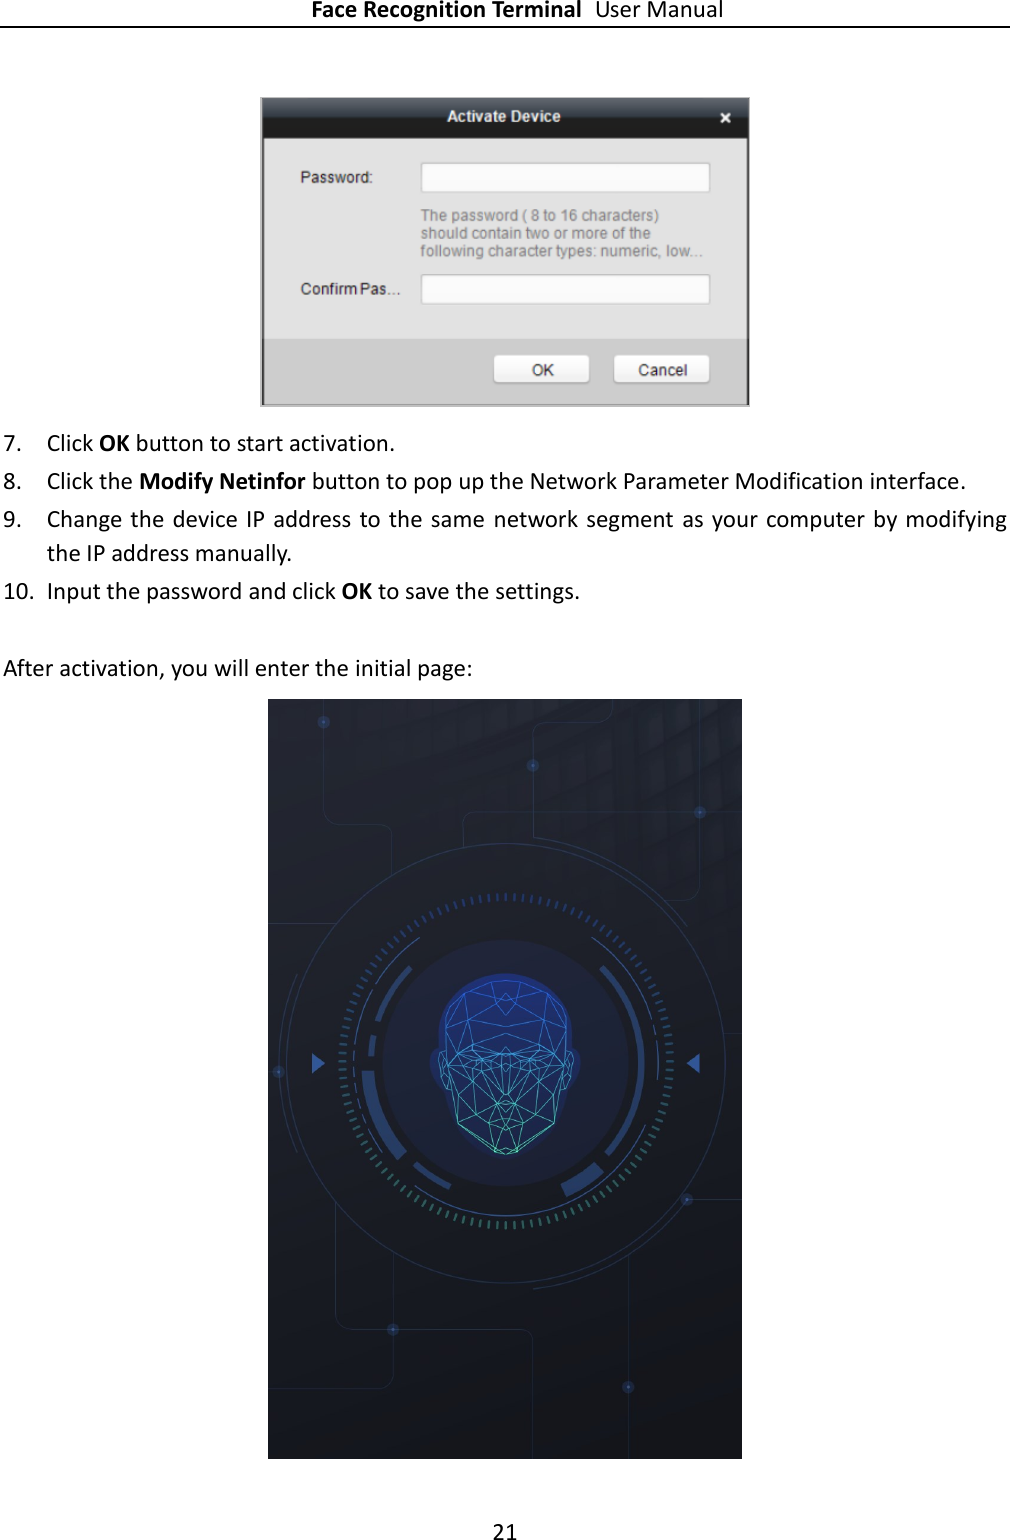 Page 22 of Hangzhou Hikvision Digital Technology K1T604 Face Recognition Terminal User Manual 